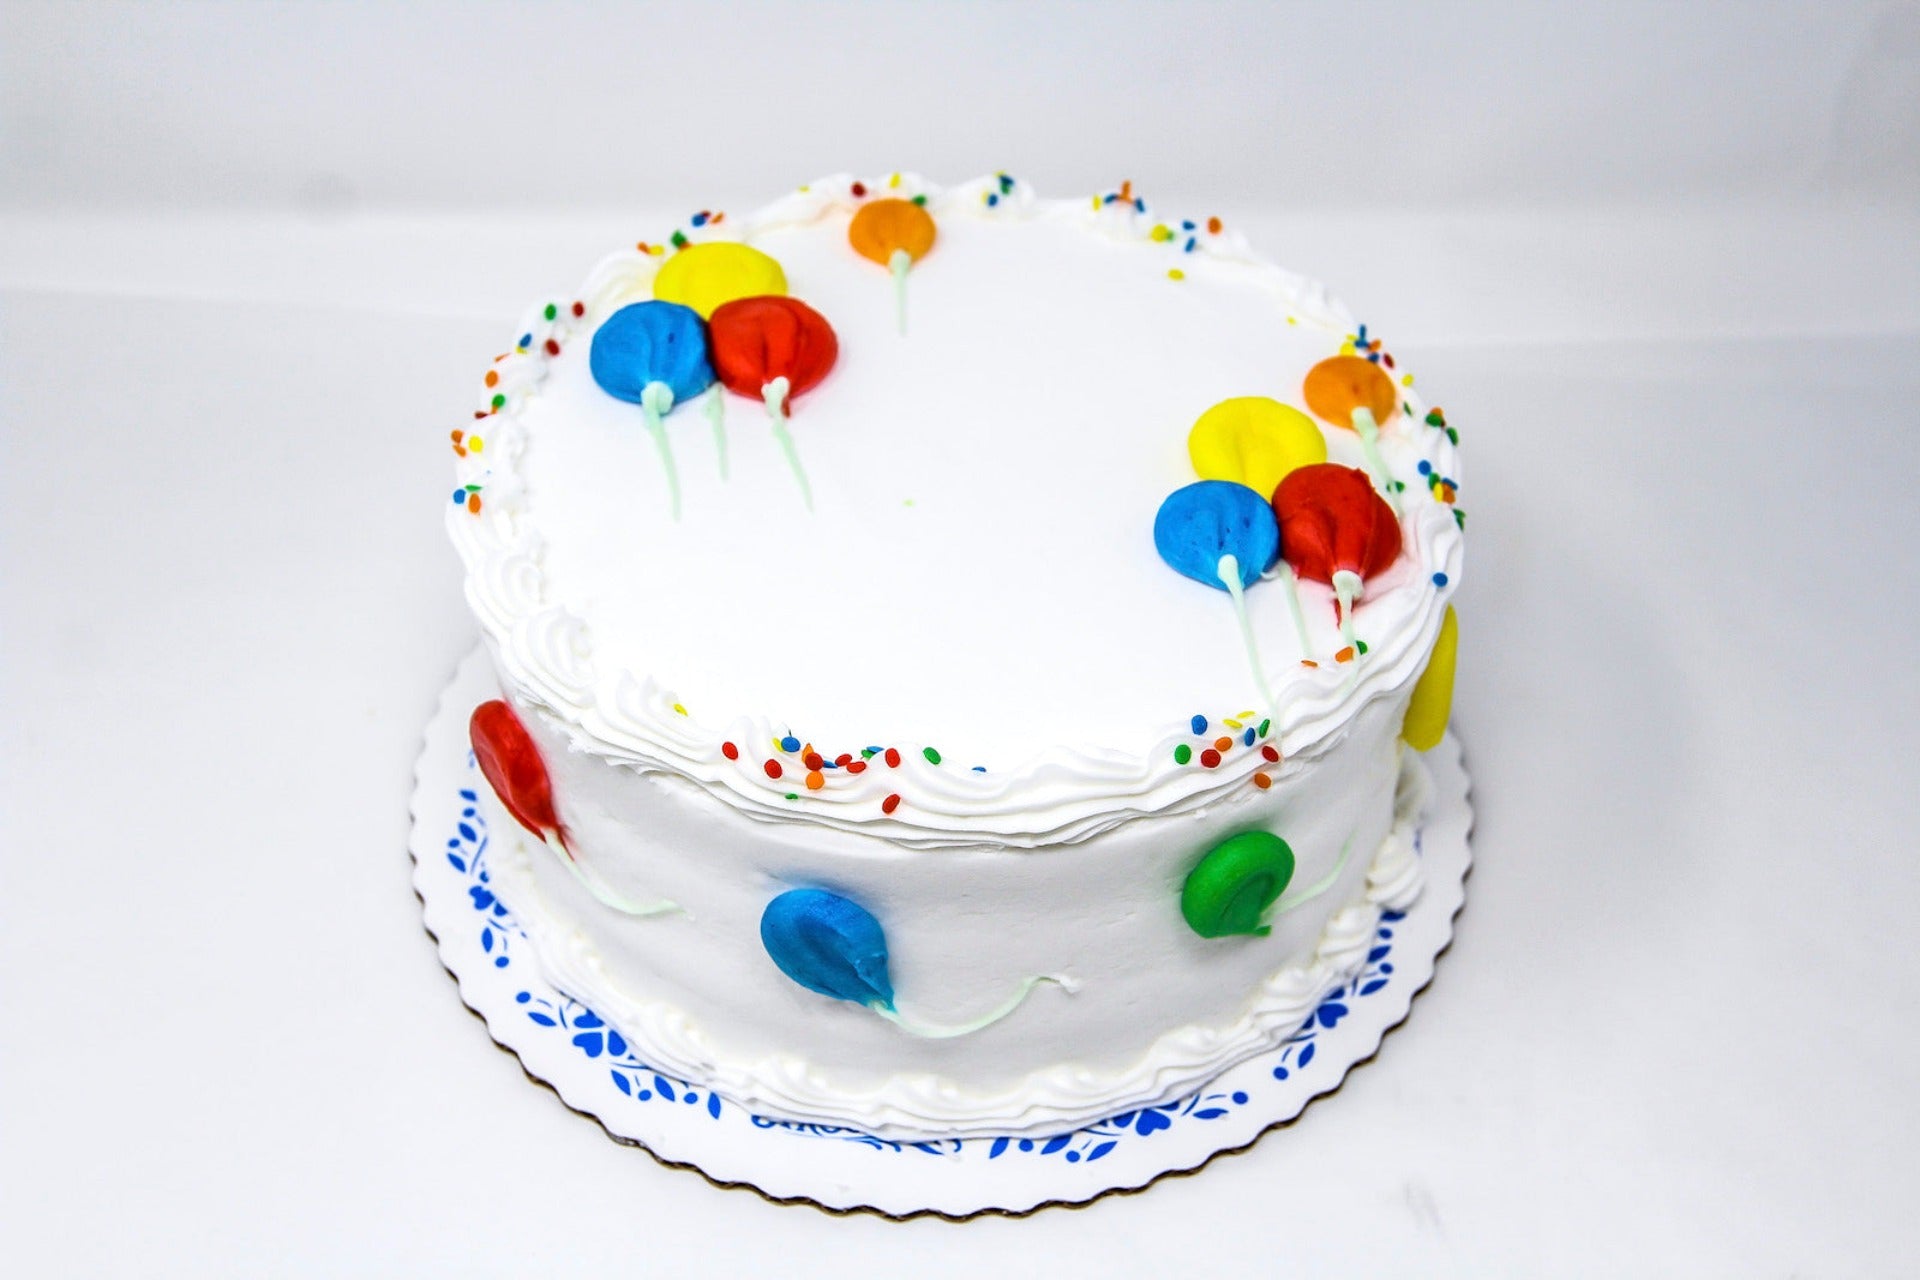 Custom Decorated Cakes – Order Form | Icing on the Cake